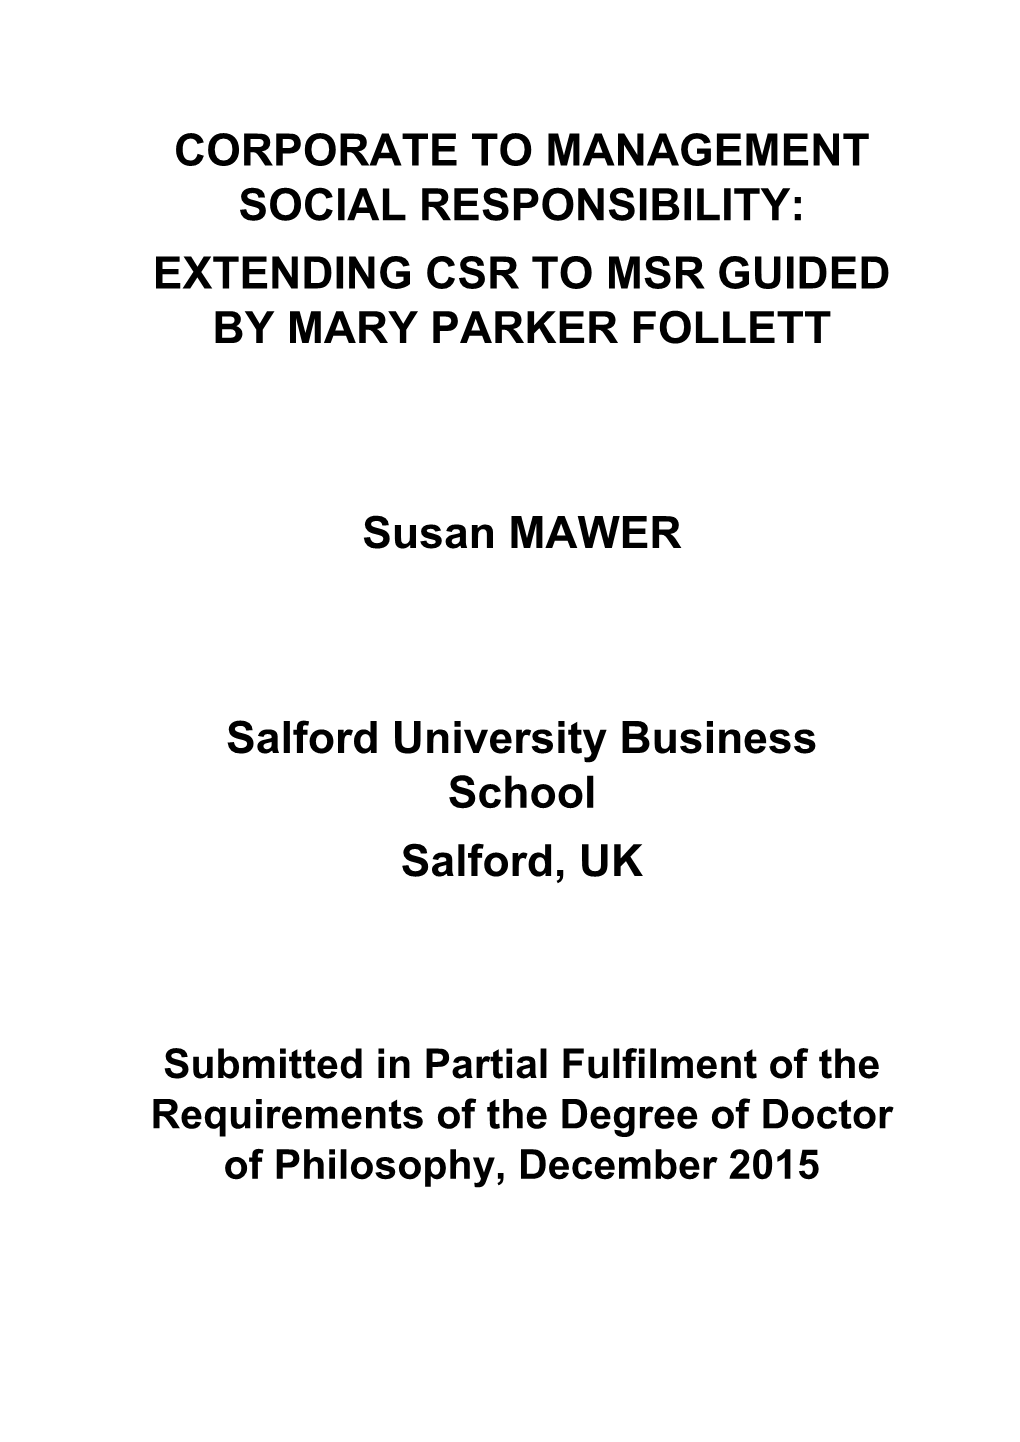 Corporate to Management Social Responsibility: Extending Csr to Msr Guided by Mary Parker Follett